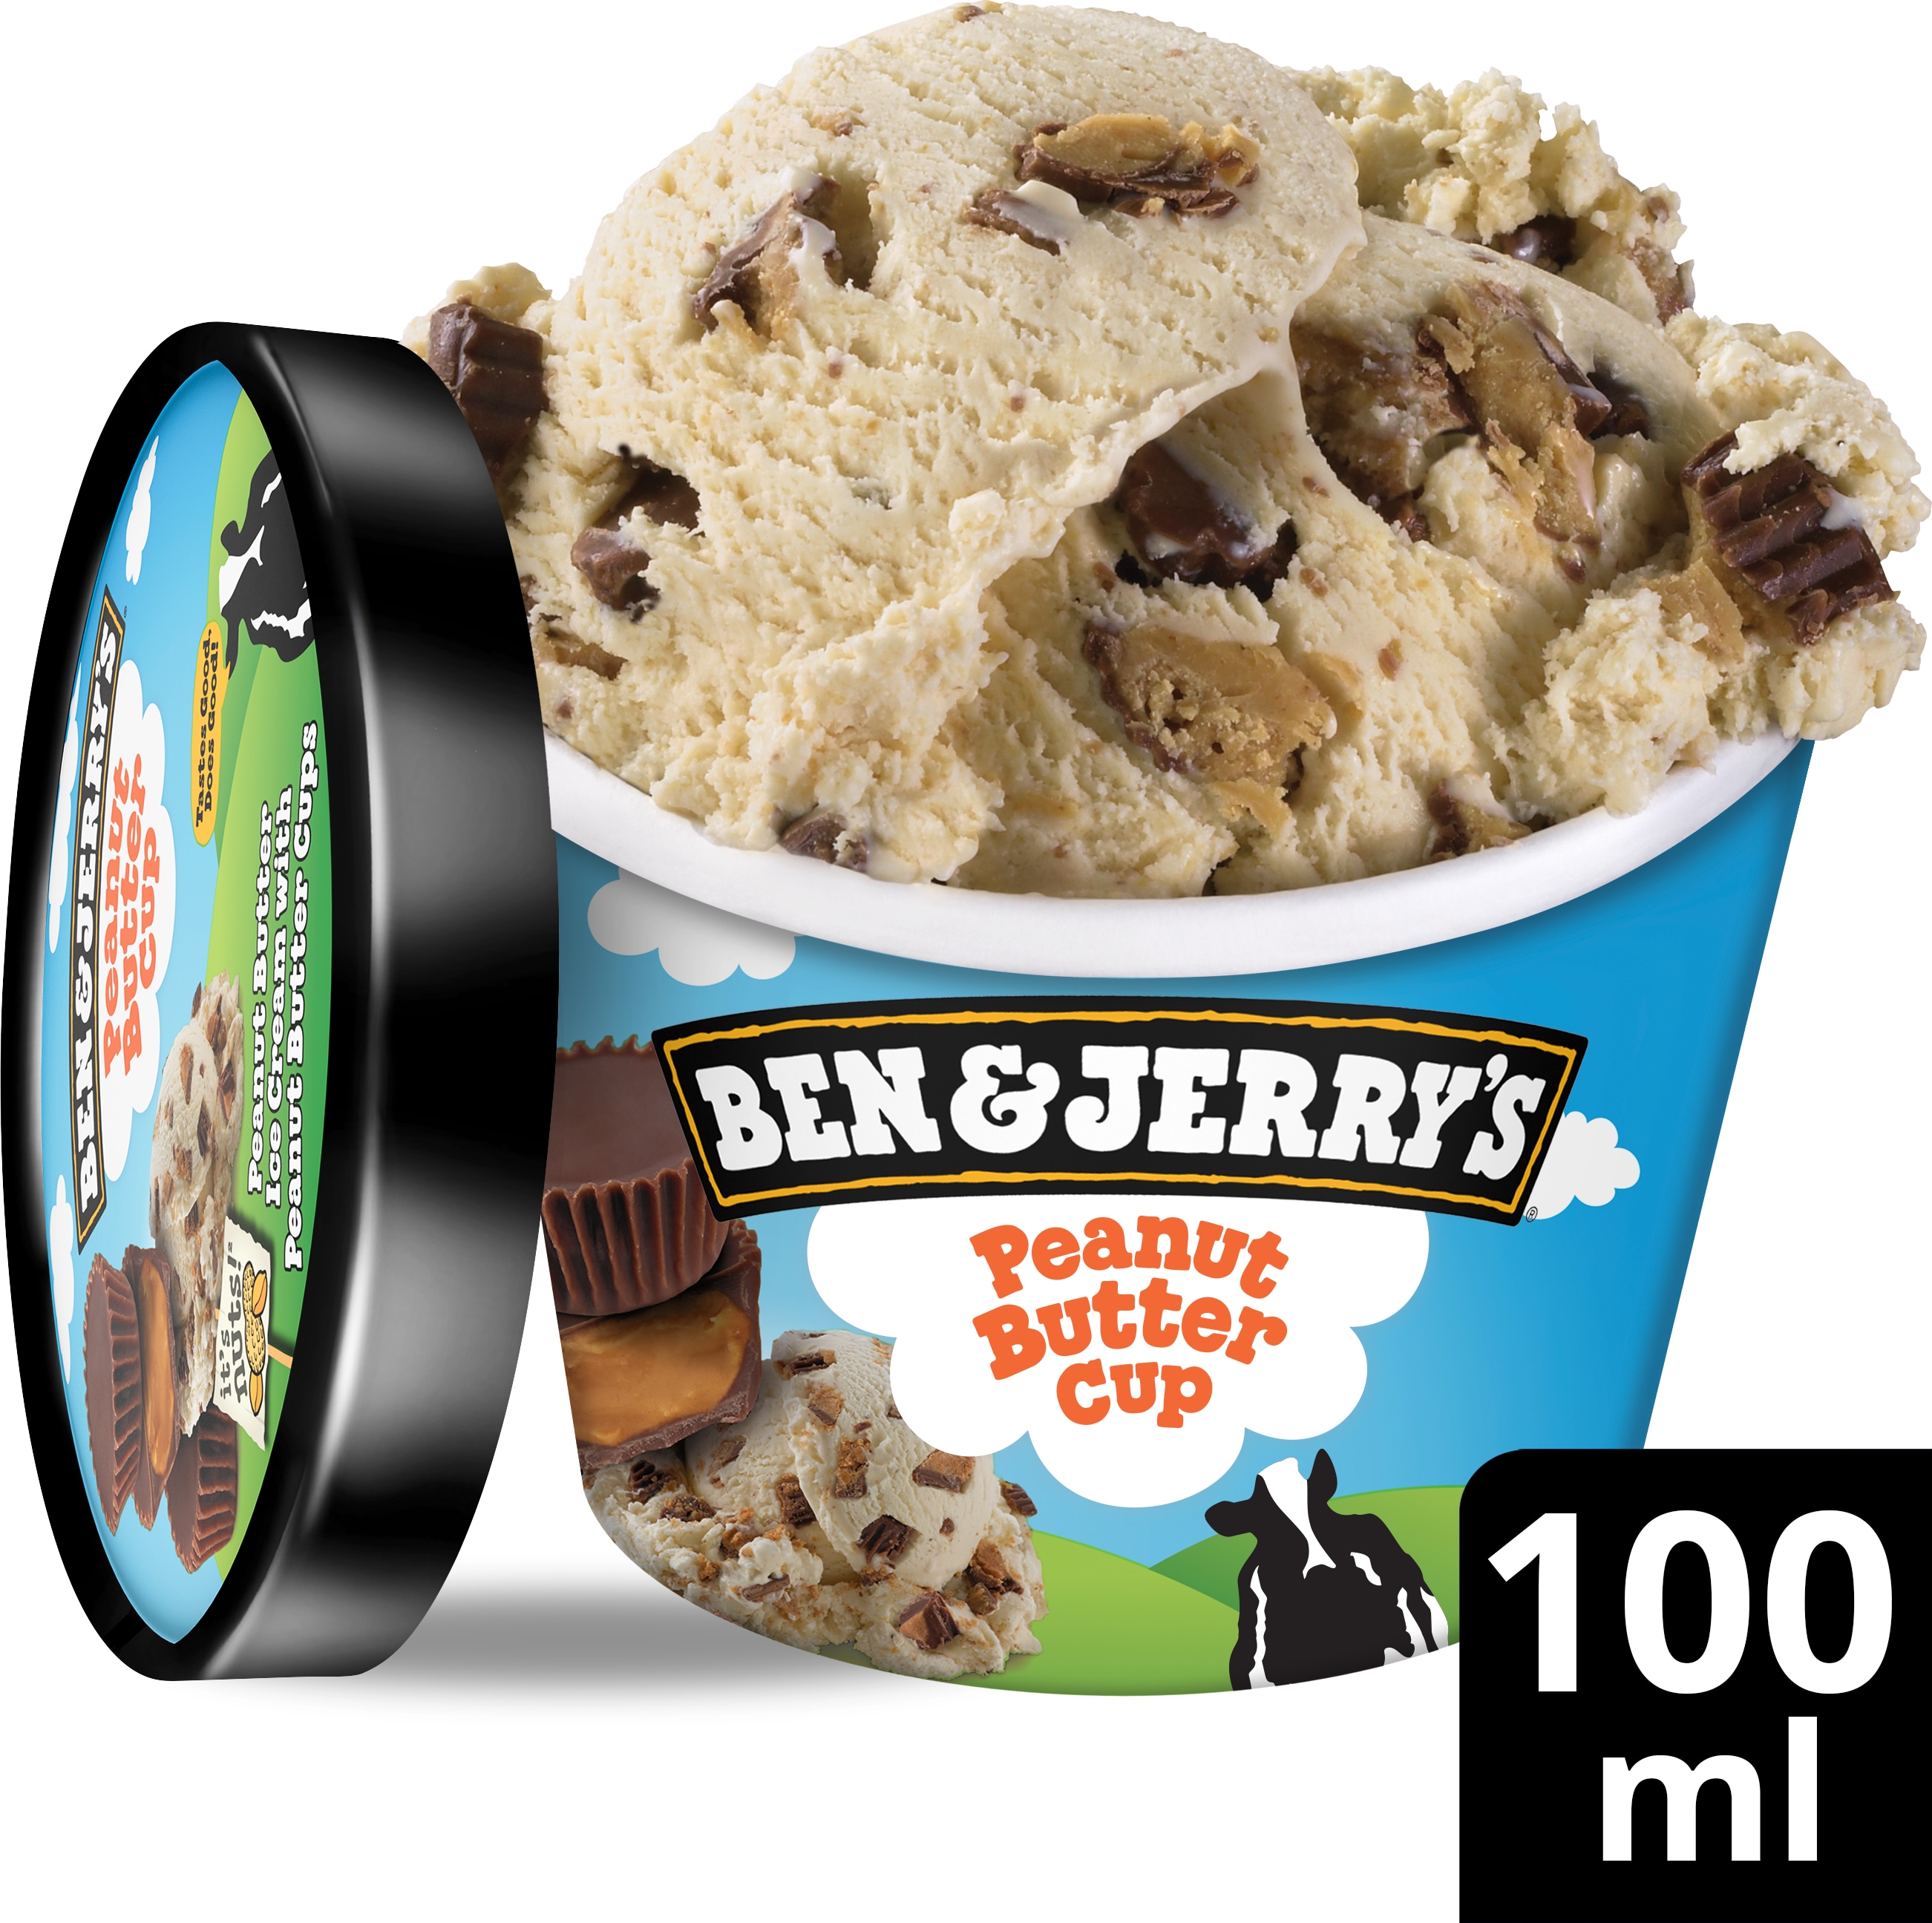 Ben & Jerry's Mini Glace Peanut Butter Cup 12 x 100 ml - 